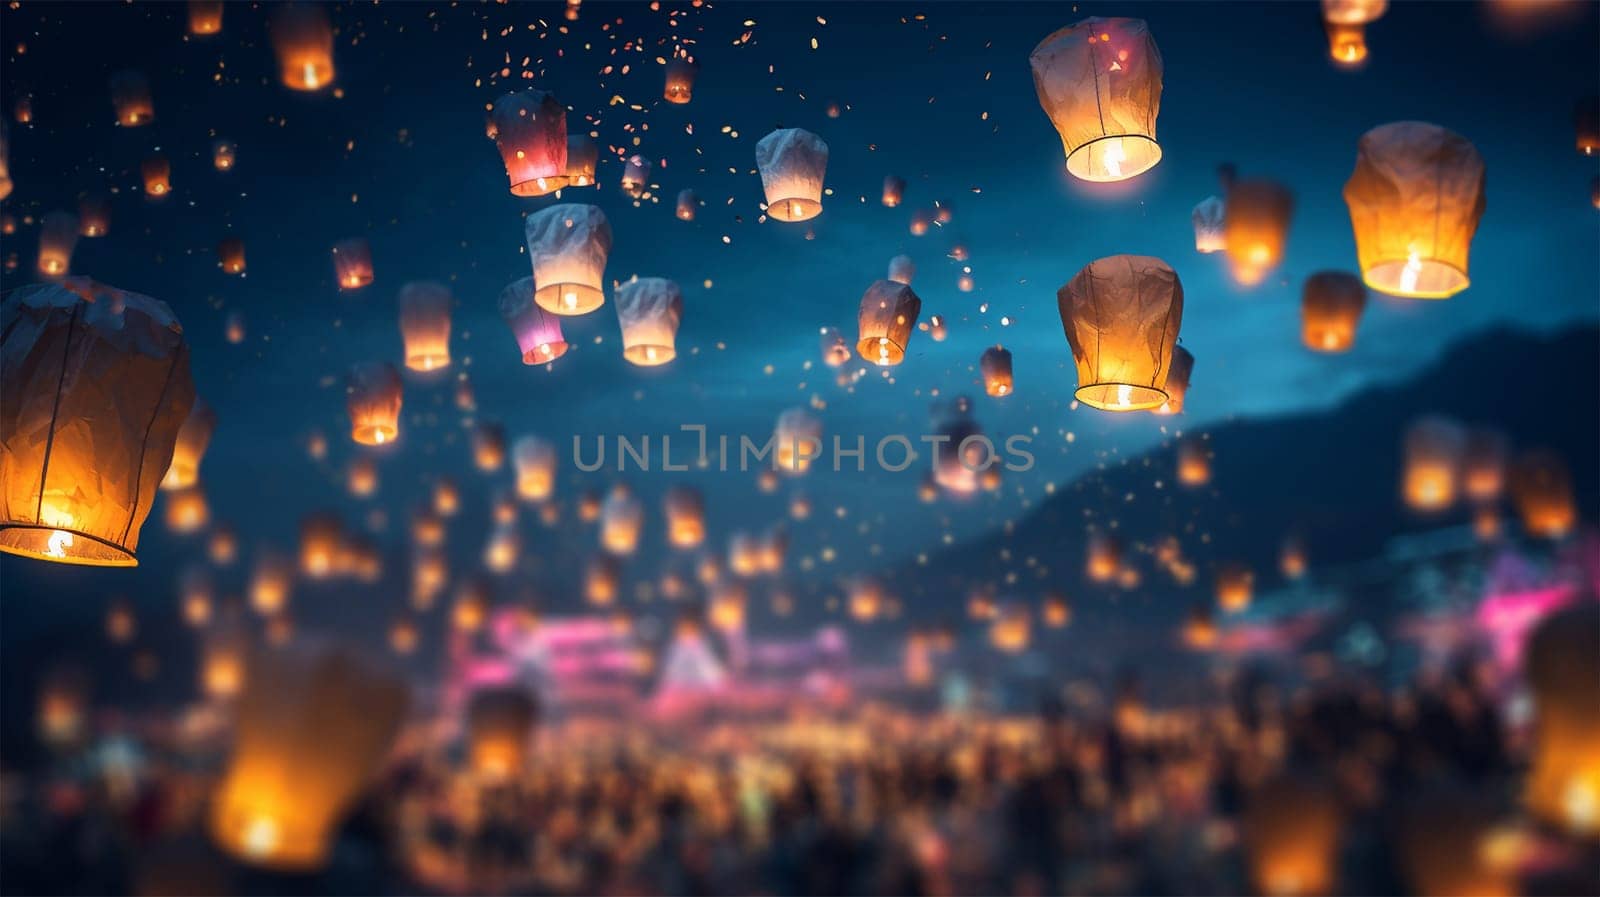 Lantern Festival background, Shangyuan Festival China. Magical flying lanterns in the colorful sky. beautiful lights sparkling. Chinese festive background by Annebel146